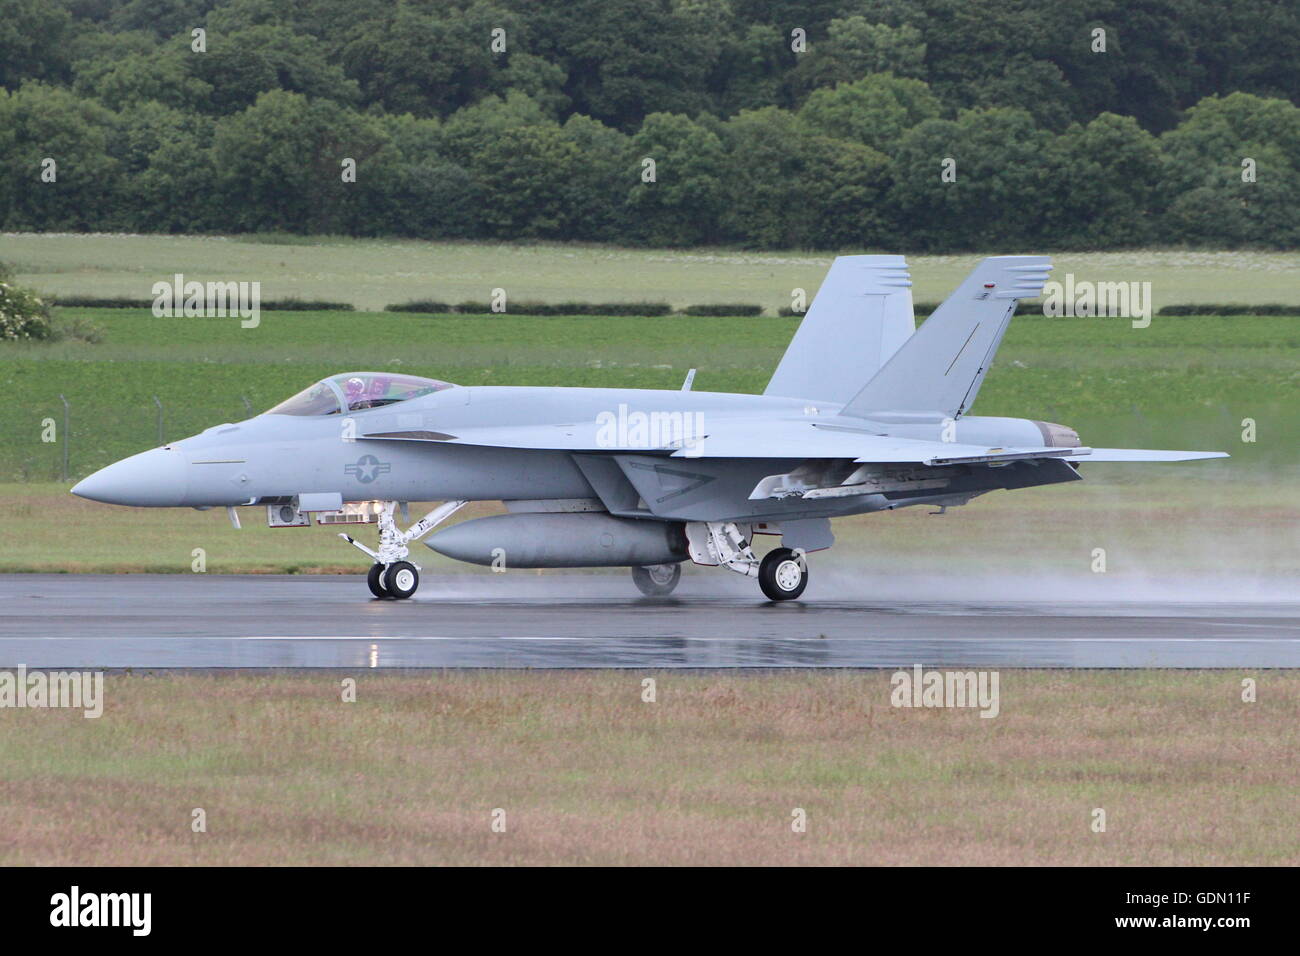 169119, a Boeing F/A-18E Super Hornet of the United States Navy, stages through Prestwick en route for display at Farnborough. Stock Photo